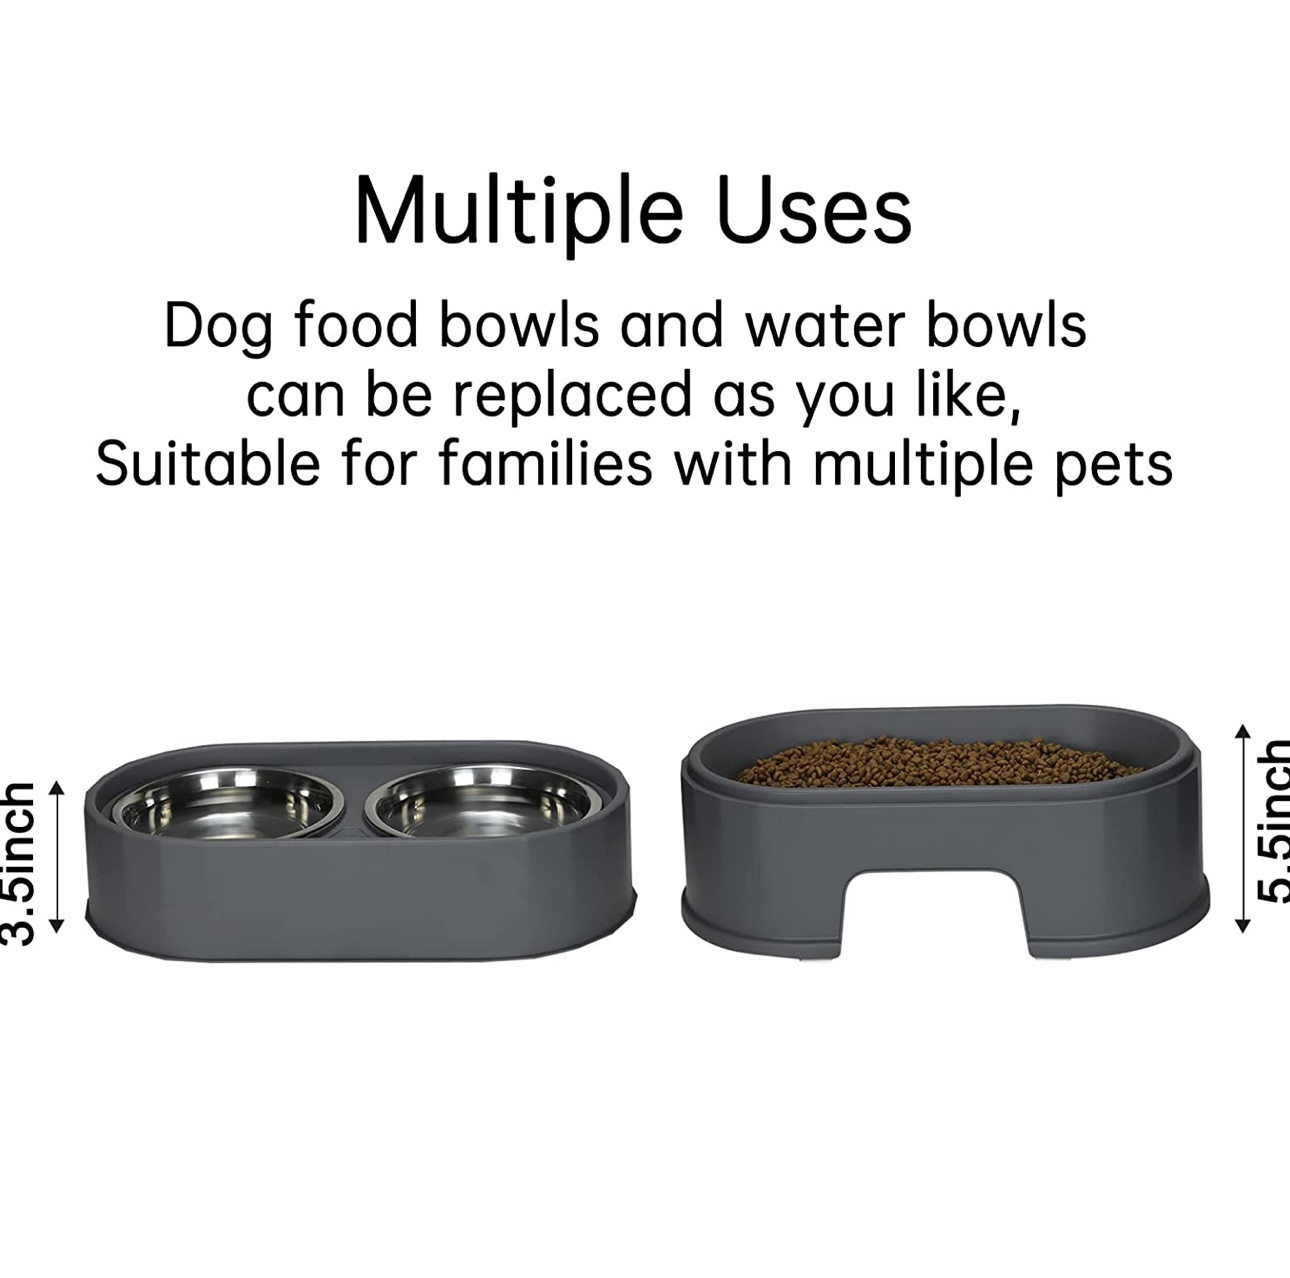 Petace Dog Bowls, Elevated Dog Bowls for Large Dogs, Raised Dog Bowl Stand  with No Spill Dog Water Bowl & Stainless Steel Dog Food Bowl, 4 Heights